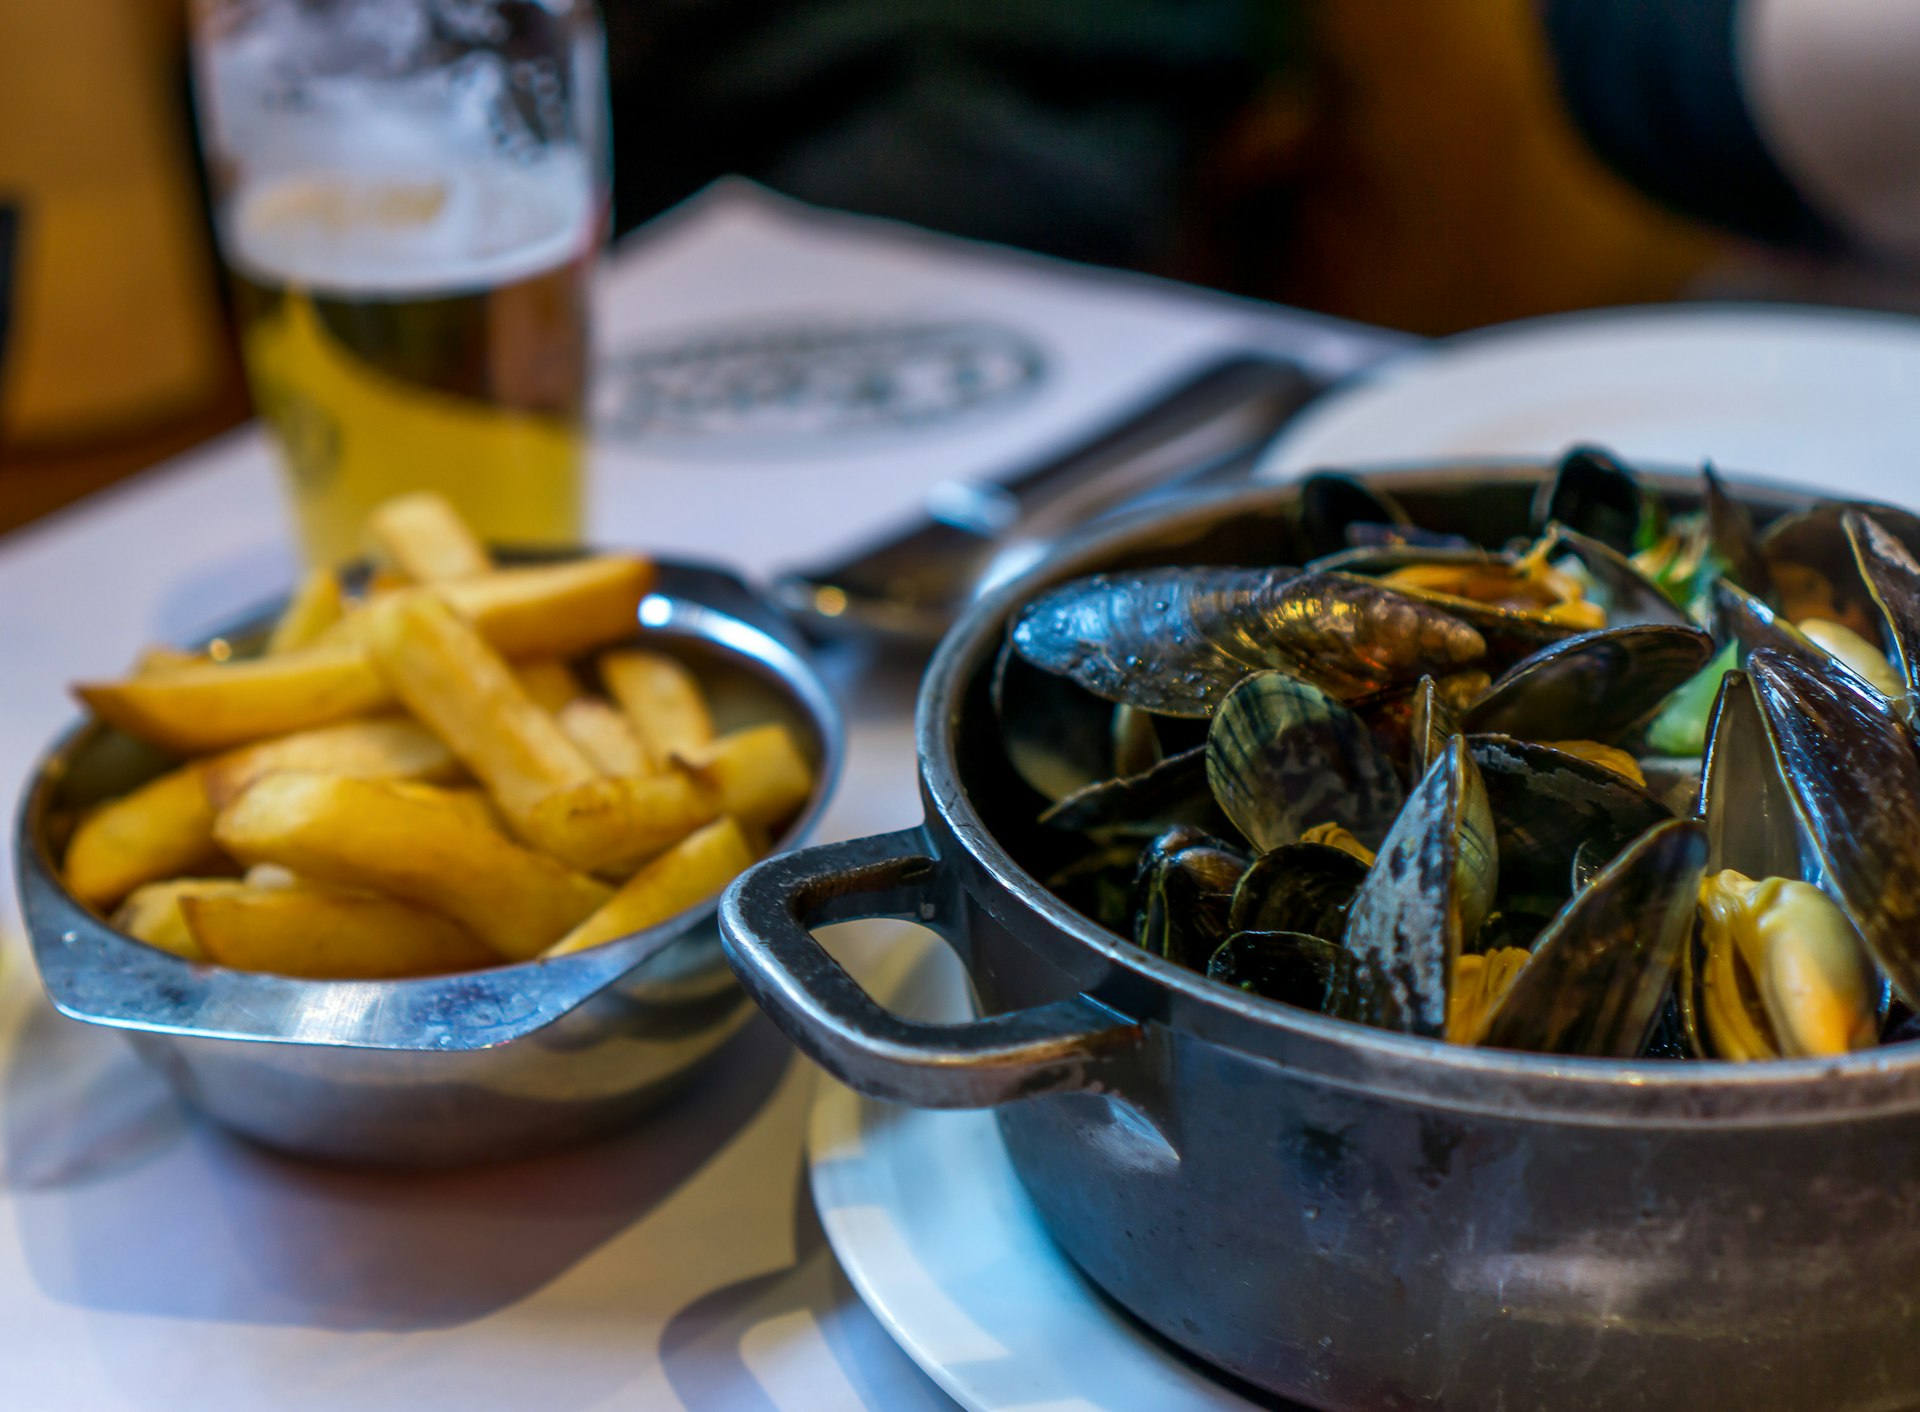 A pot of steaming mussels, with black shells and orange inners, stand on a table next to a plate of fries and a pint of beer.